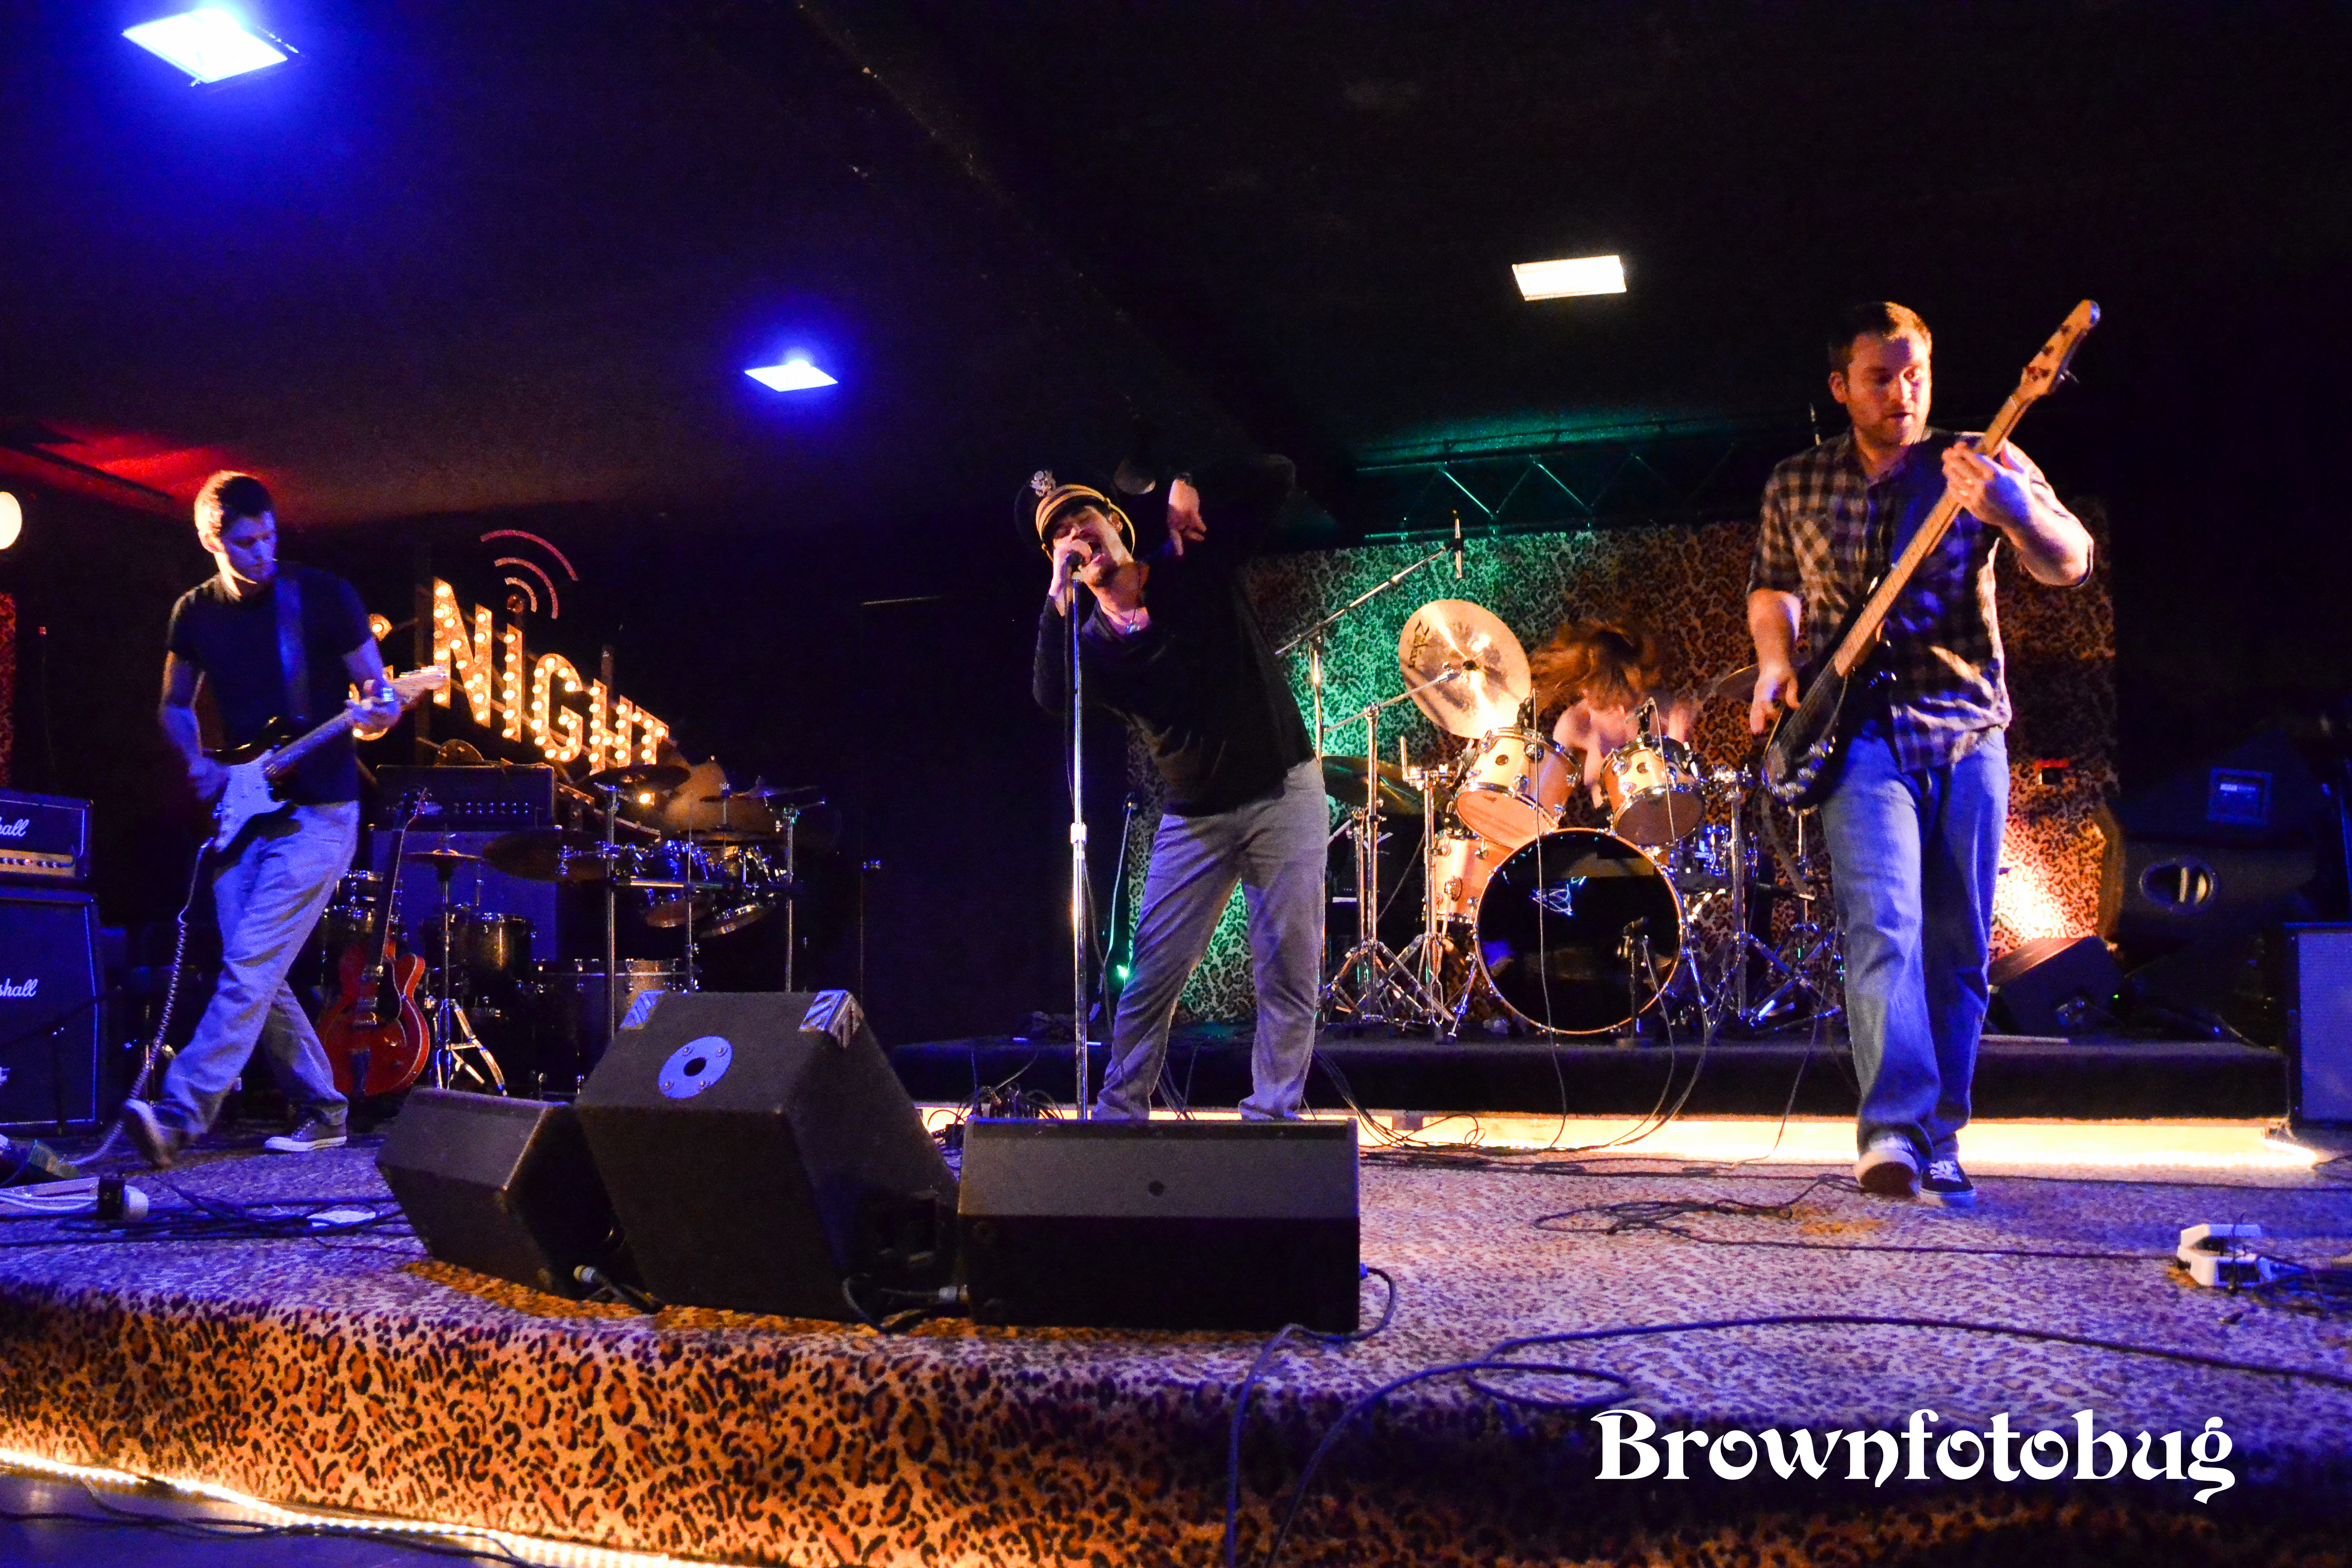 Born of Ghosts live at The Rec Room (Photo by Arlene Brown)